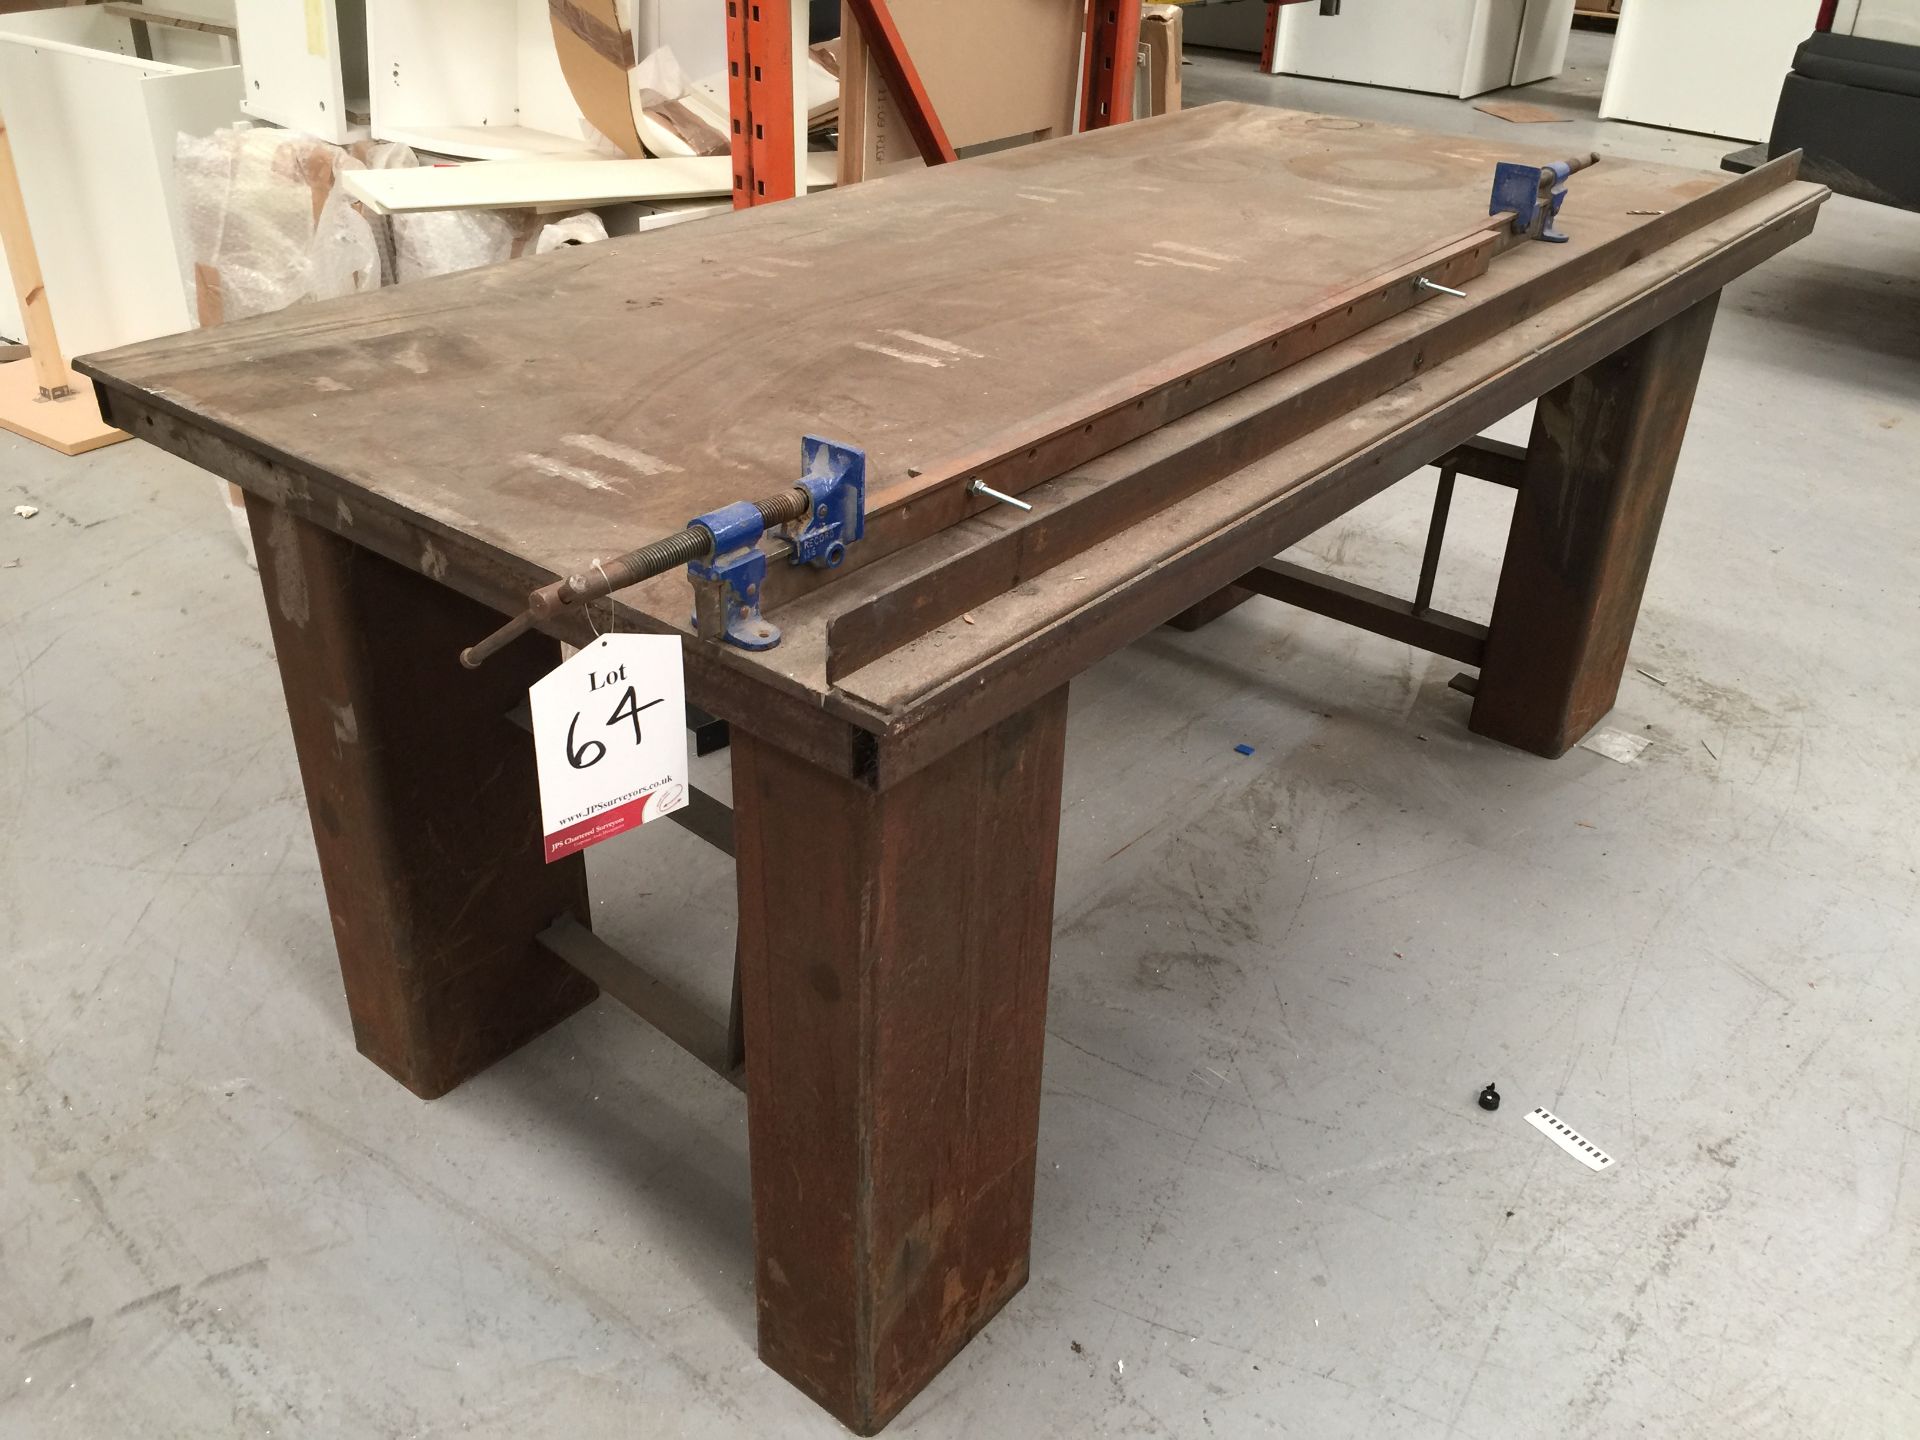 Fabricated Steel Bench with Vice | 200 x 100 - Image 2 of 2